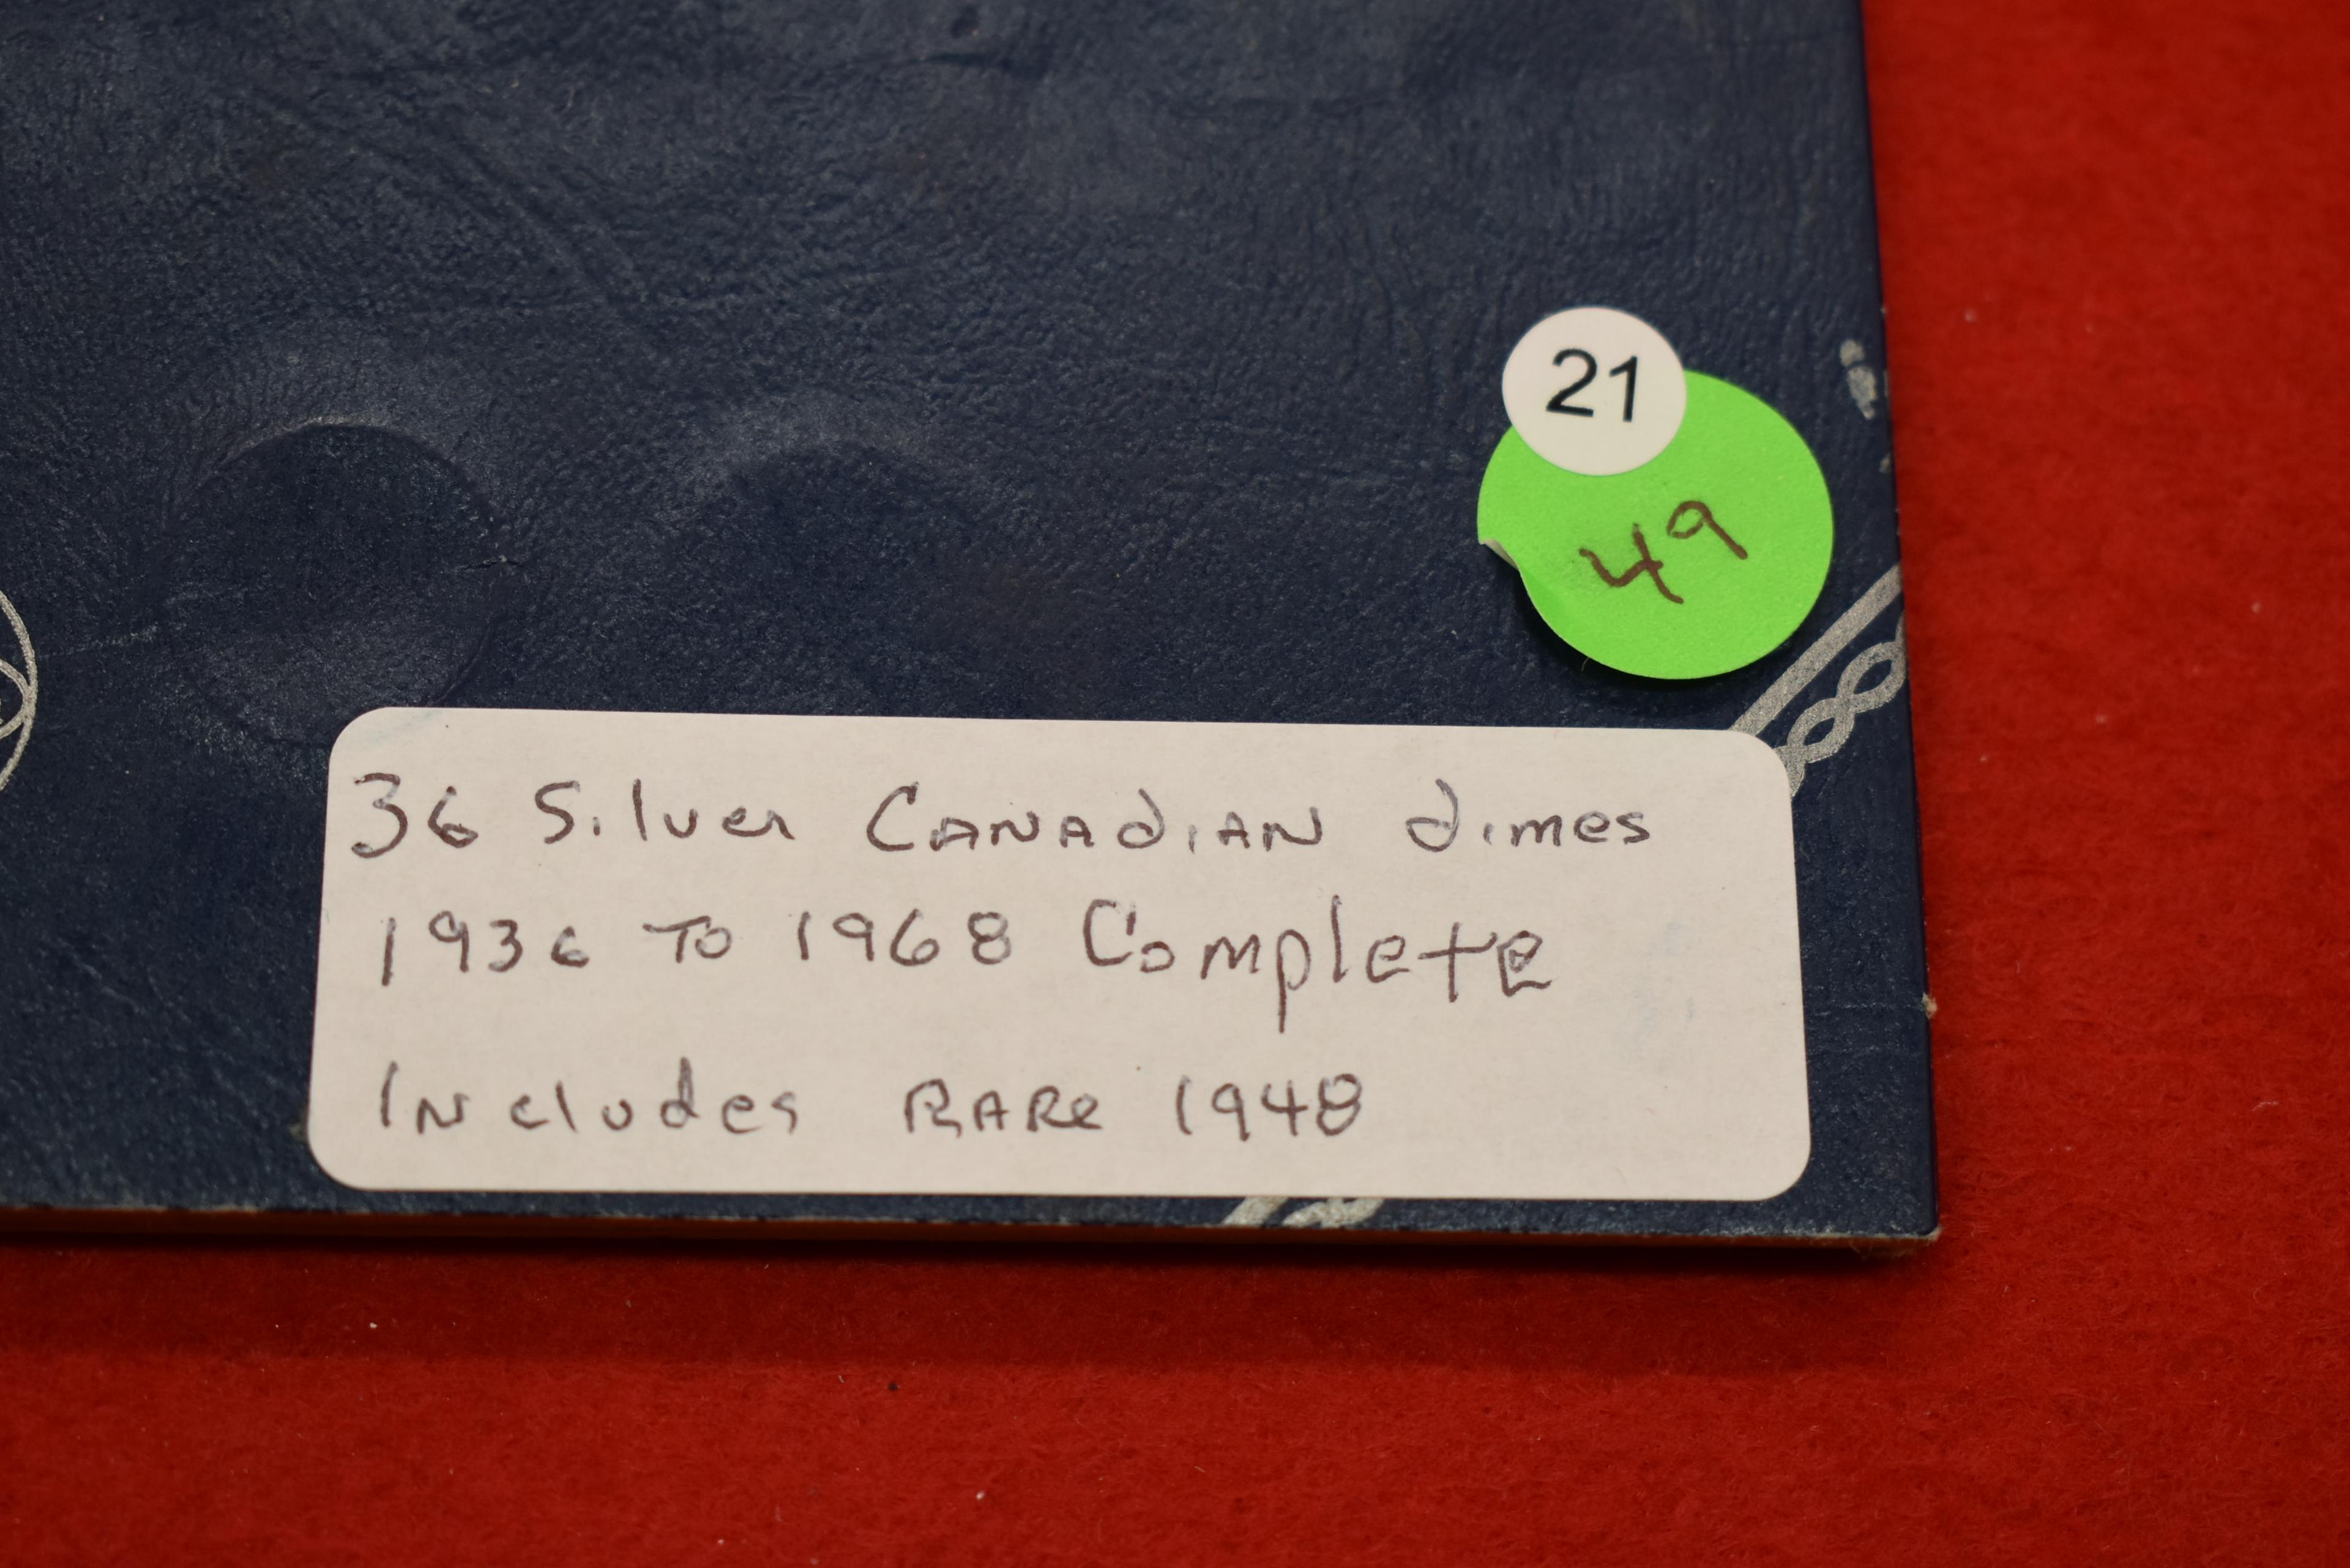 Whitman Folder With 36 Silver Canadian Dimes Including Rare 1948